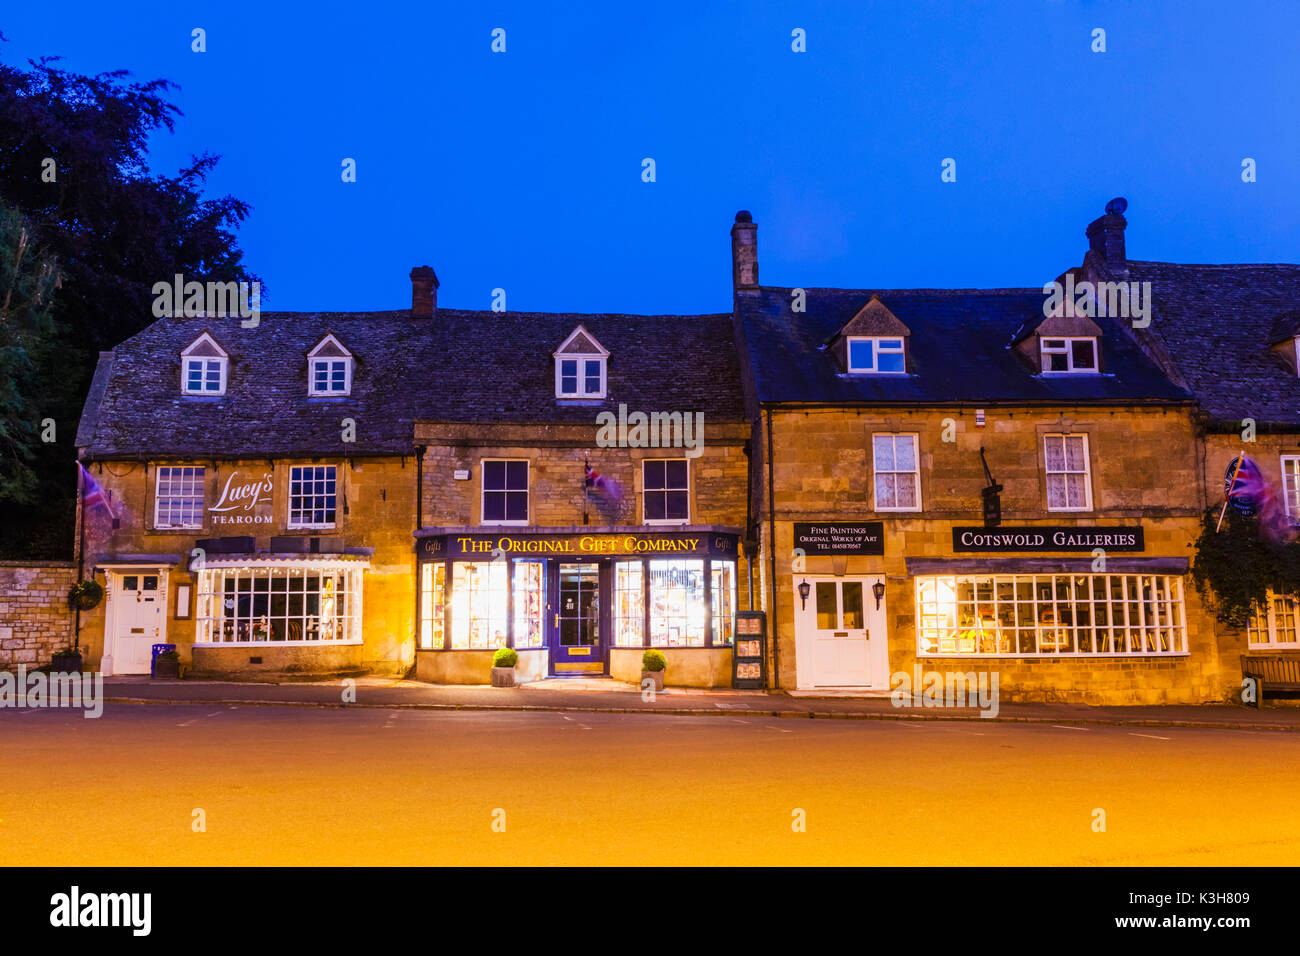 Inglaterra, Gloucestershire, Cotswolds, Stow-on-the-Wold Foto de stock